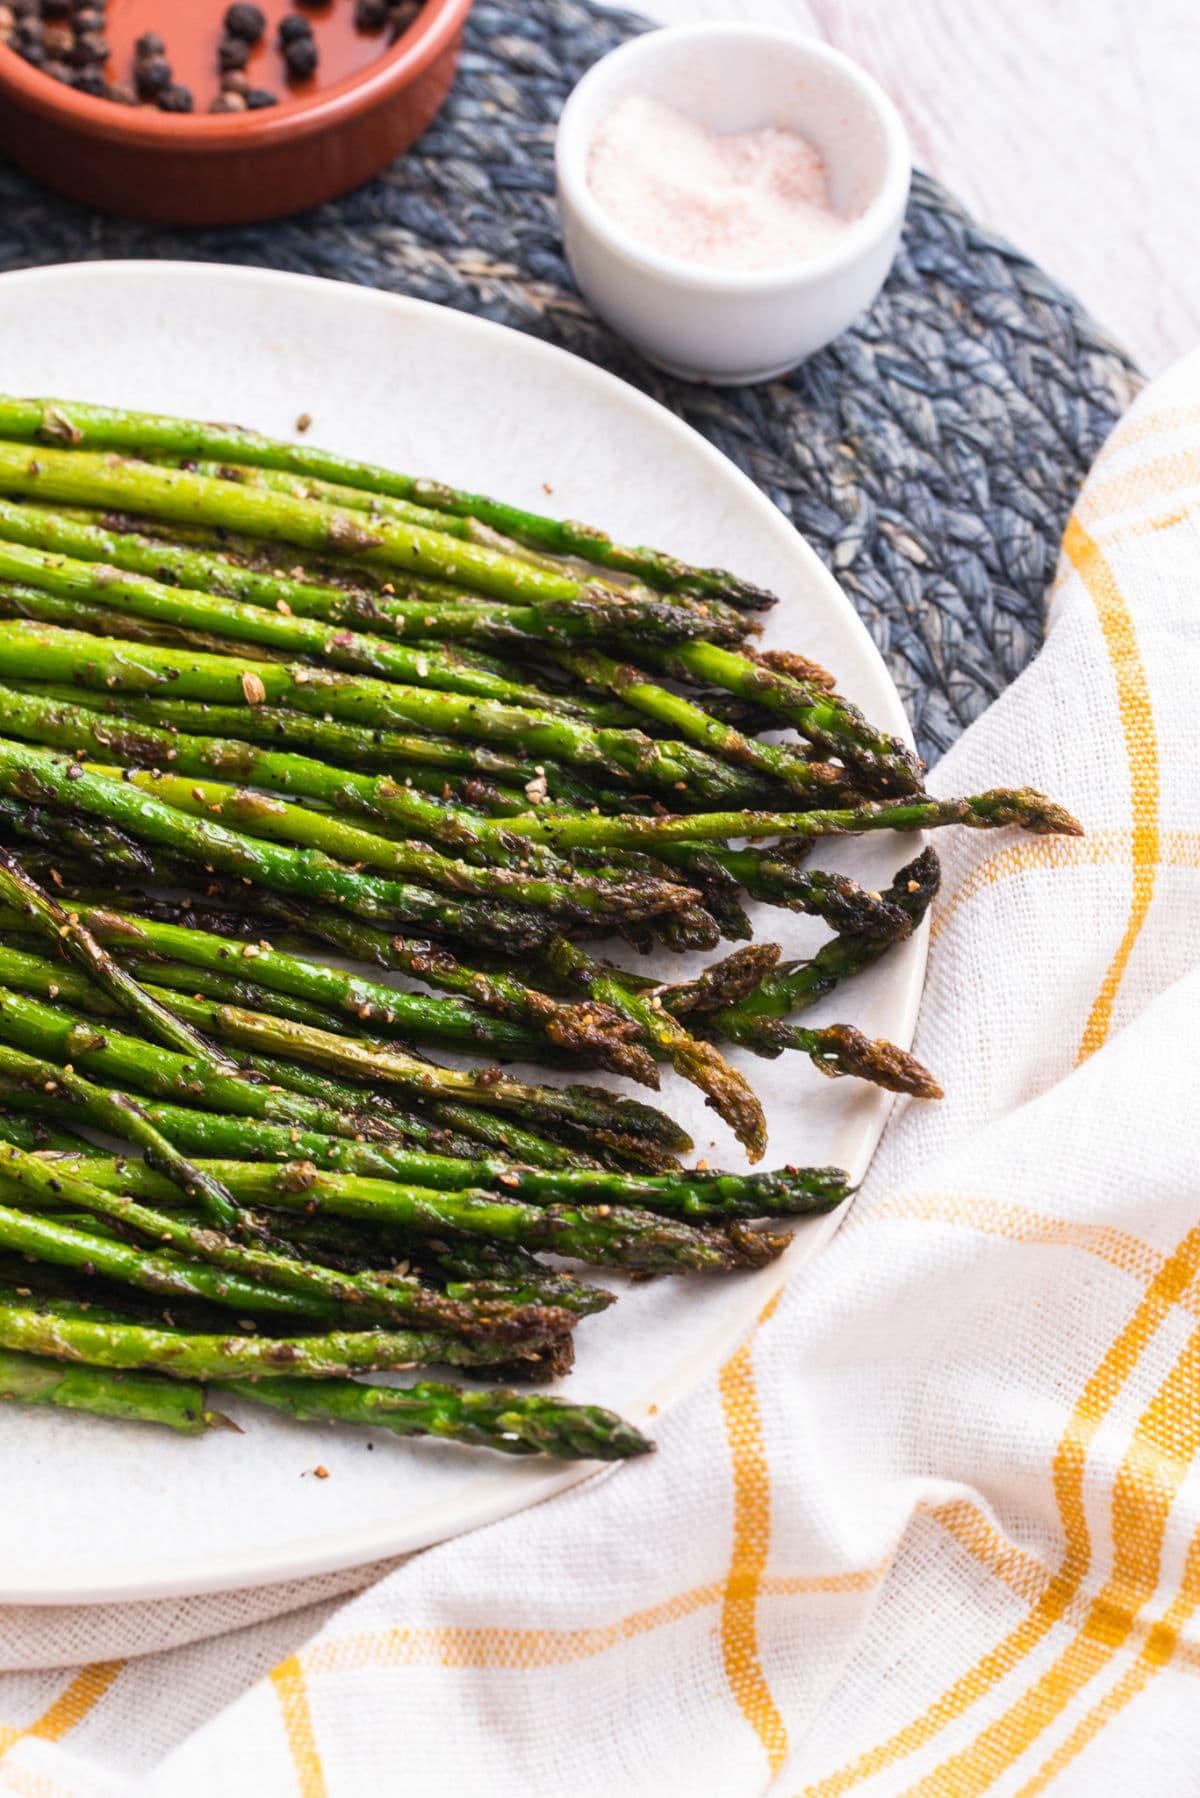 How to cook asparagus 1